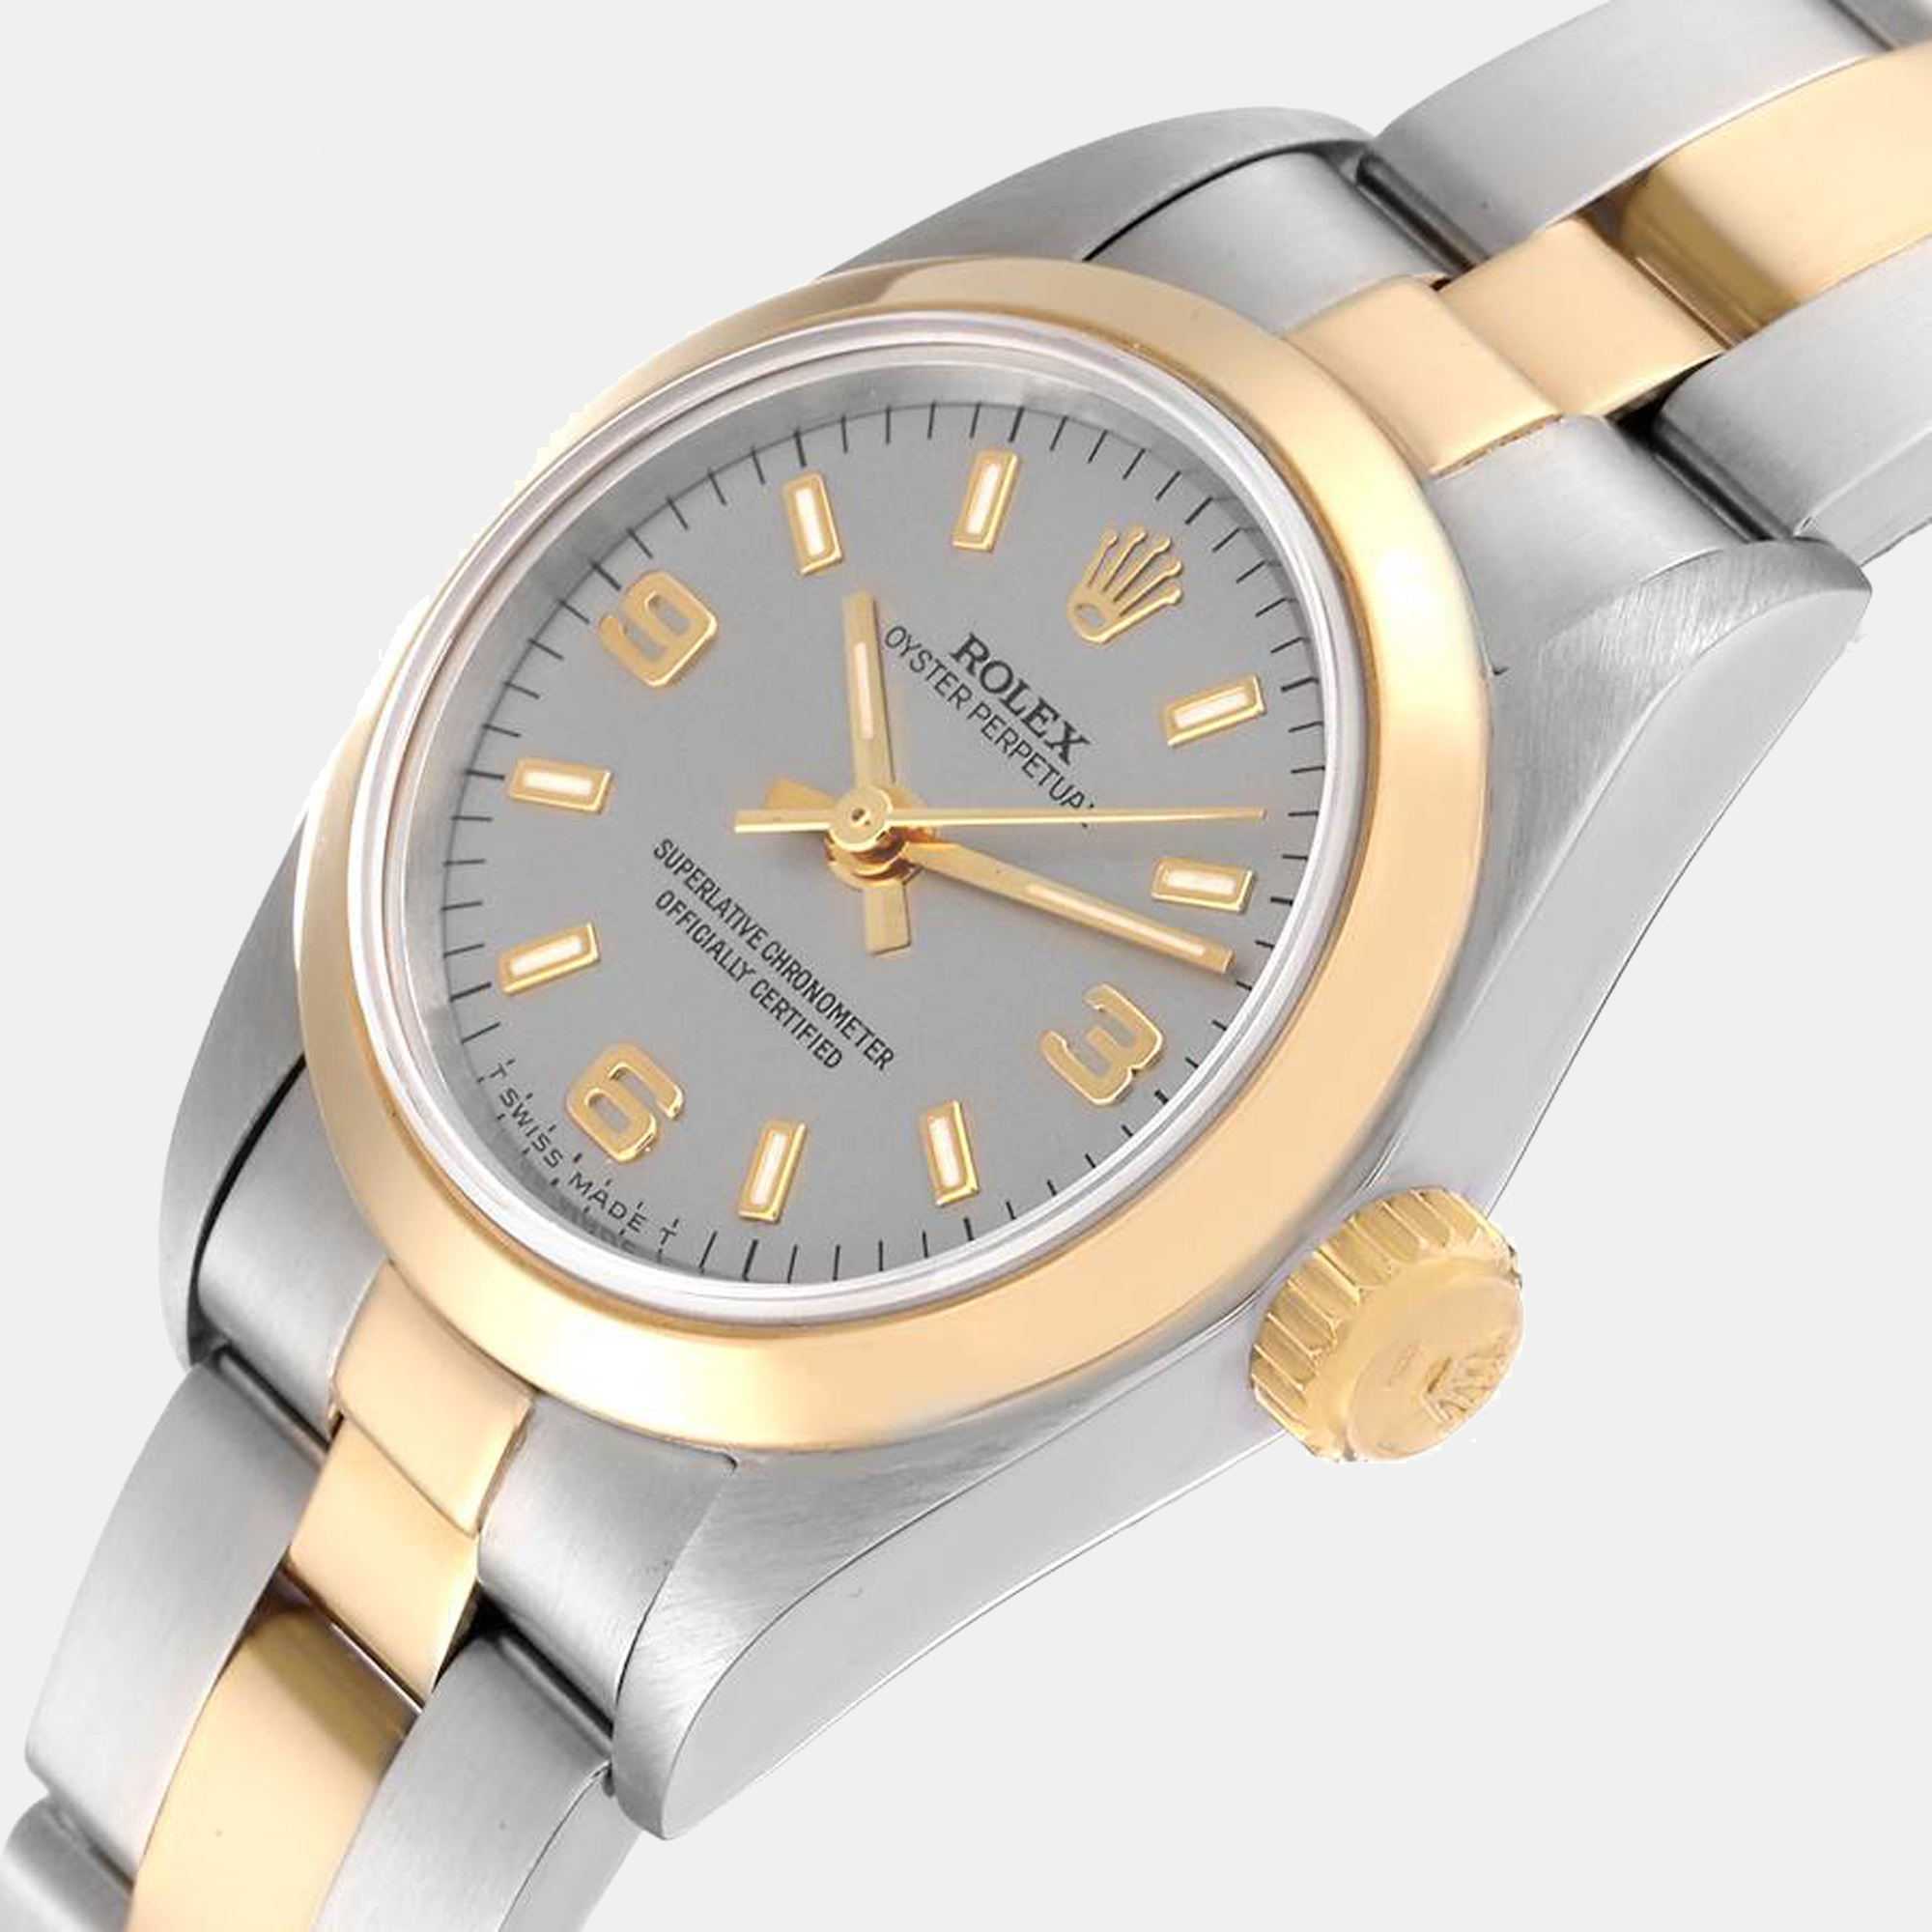 

Rolex Grey 18K Yellow Gold And Stainless Steel Oyster Perpetual 67183 Women's Wristwatch 24 mm